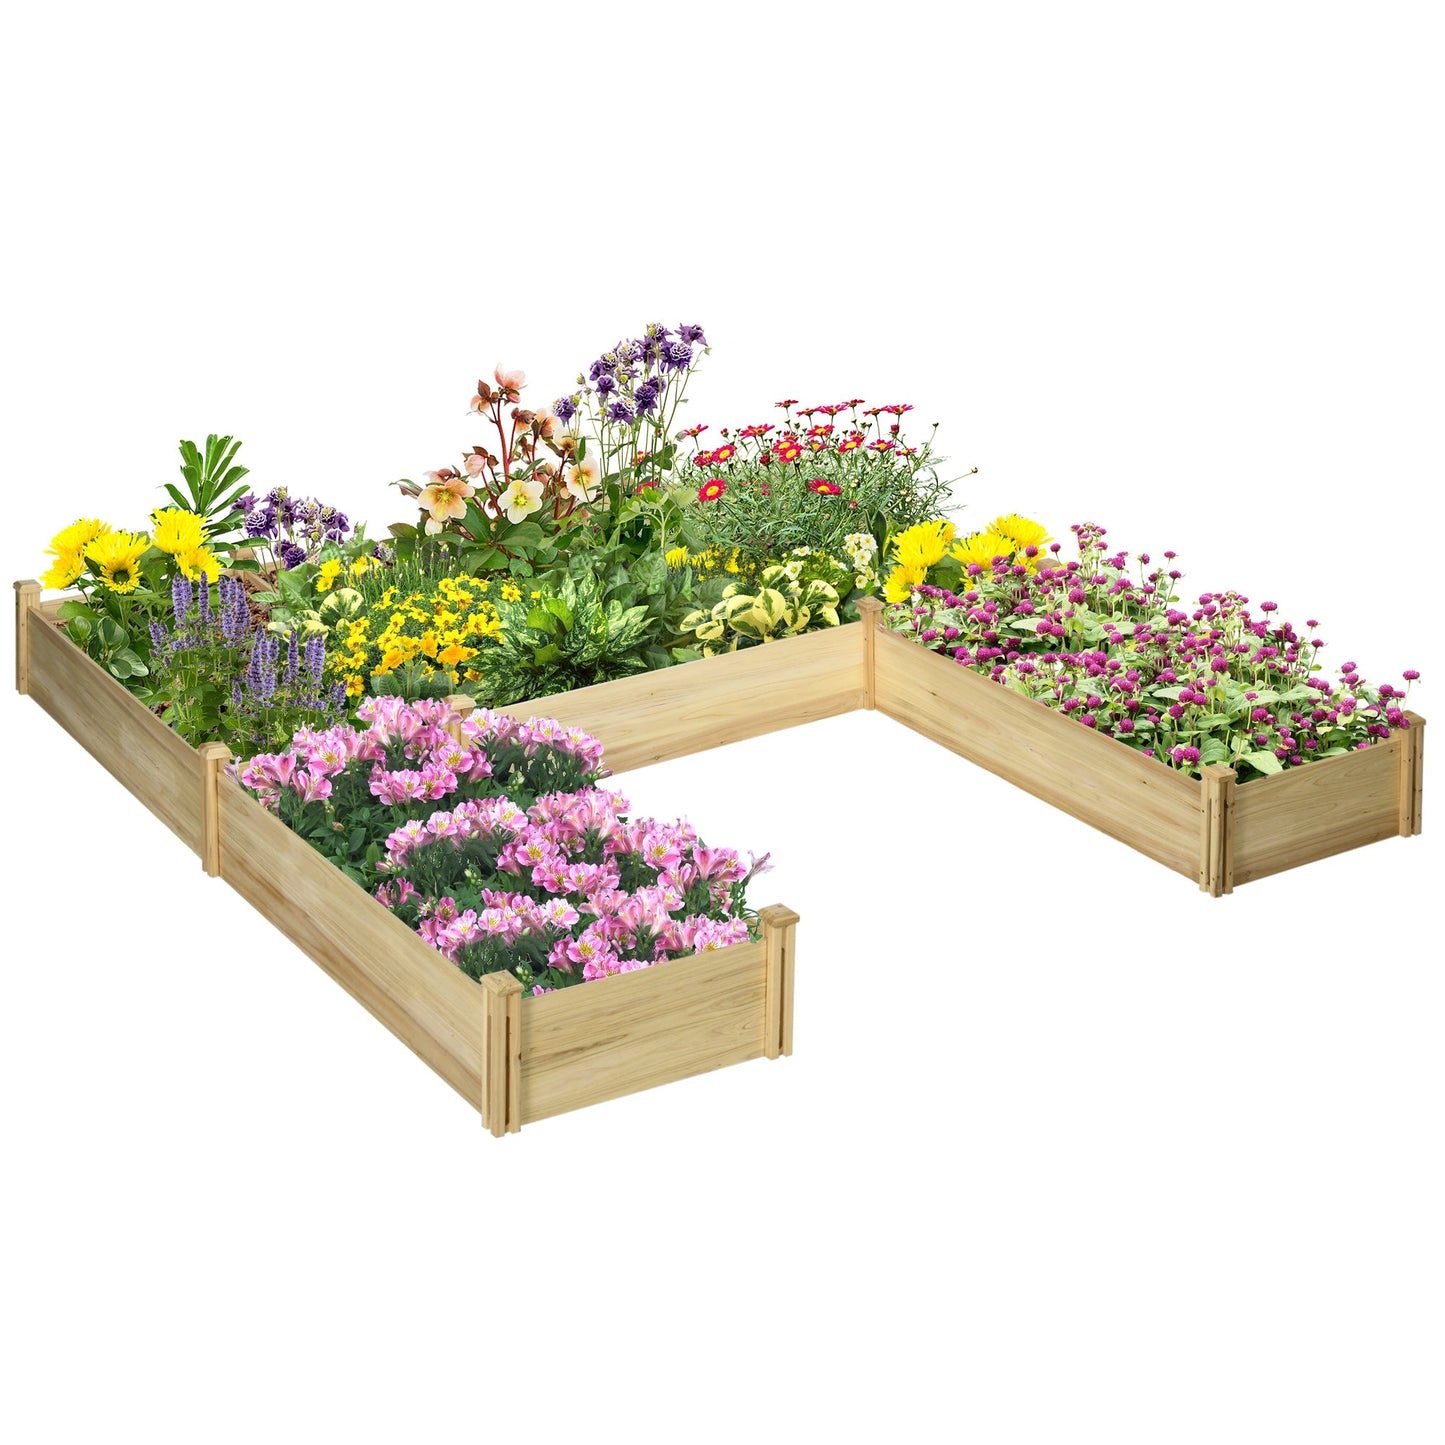 DIY Five-box Raised Garden Bed, Wooden Planter Boxes for Vegetables, Flowers, Herbs, Easy Assembly at Gallery Canada